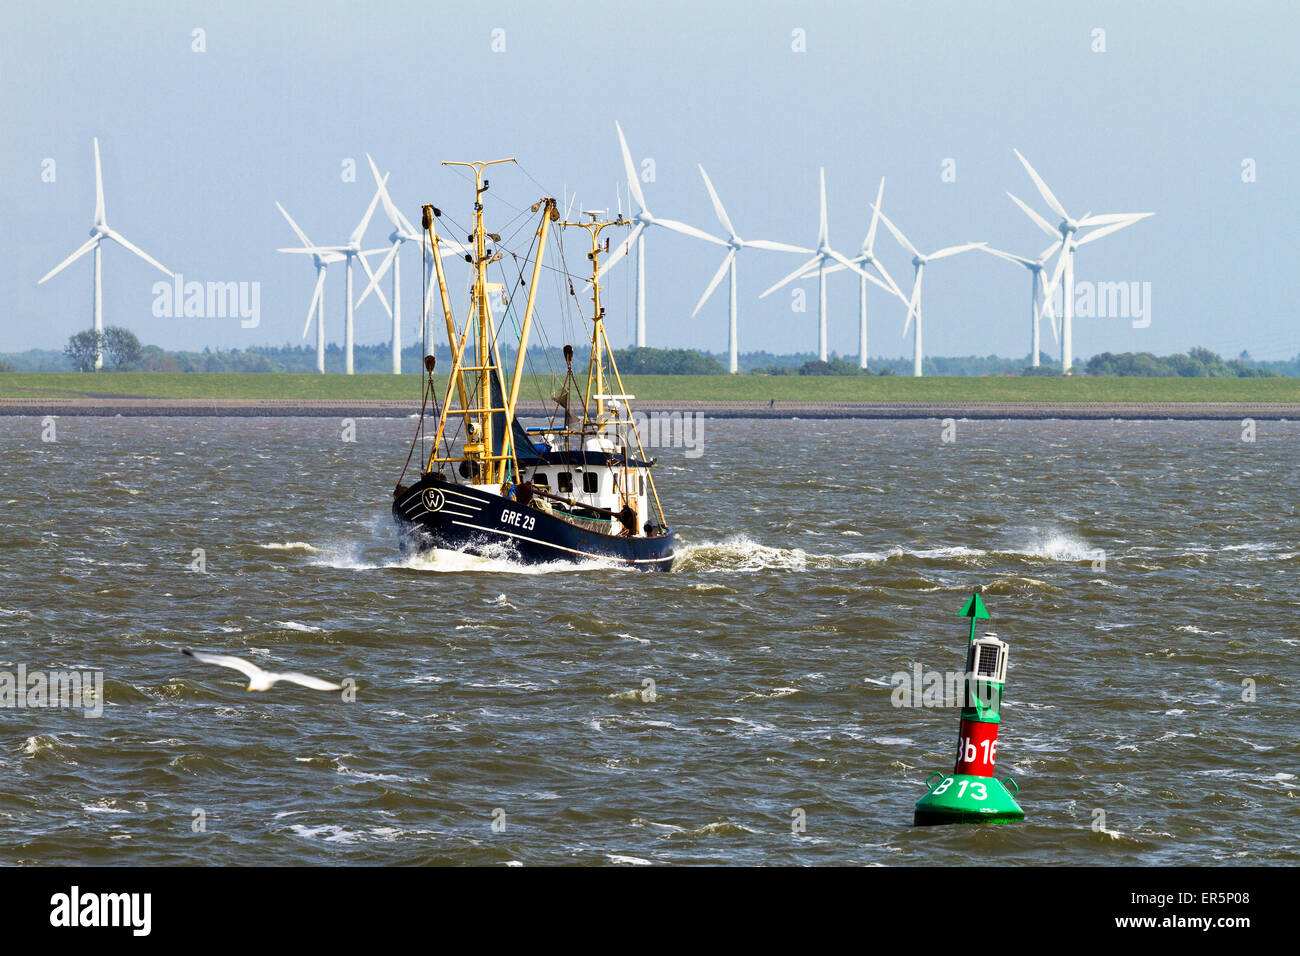 Fishing boat and wind power plant, North Sea, East Frisian Islands, East Frisia, Lower Saxony, Germany, Europe Stock Photo